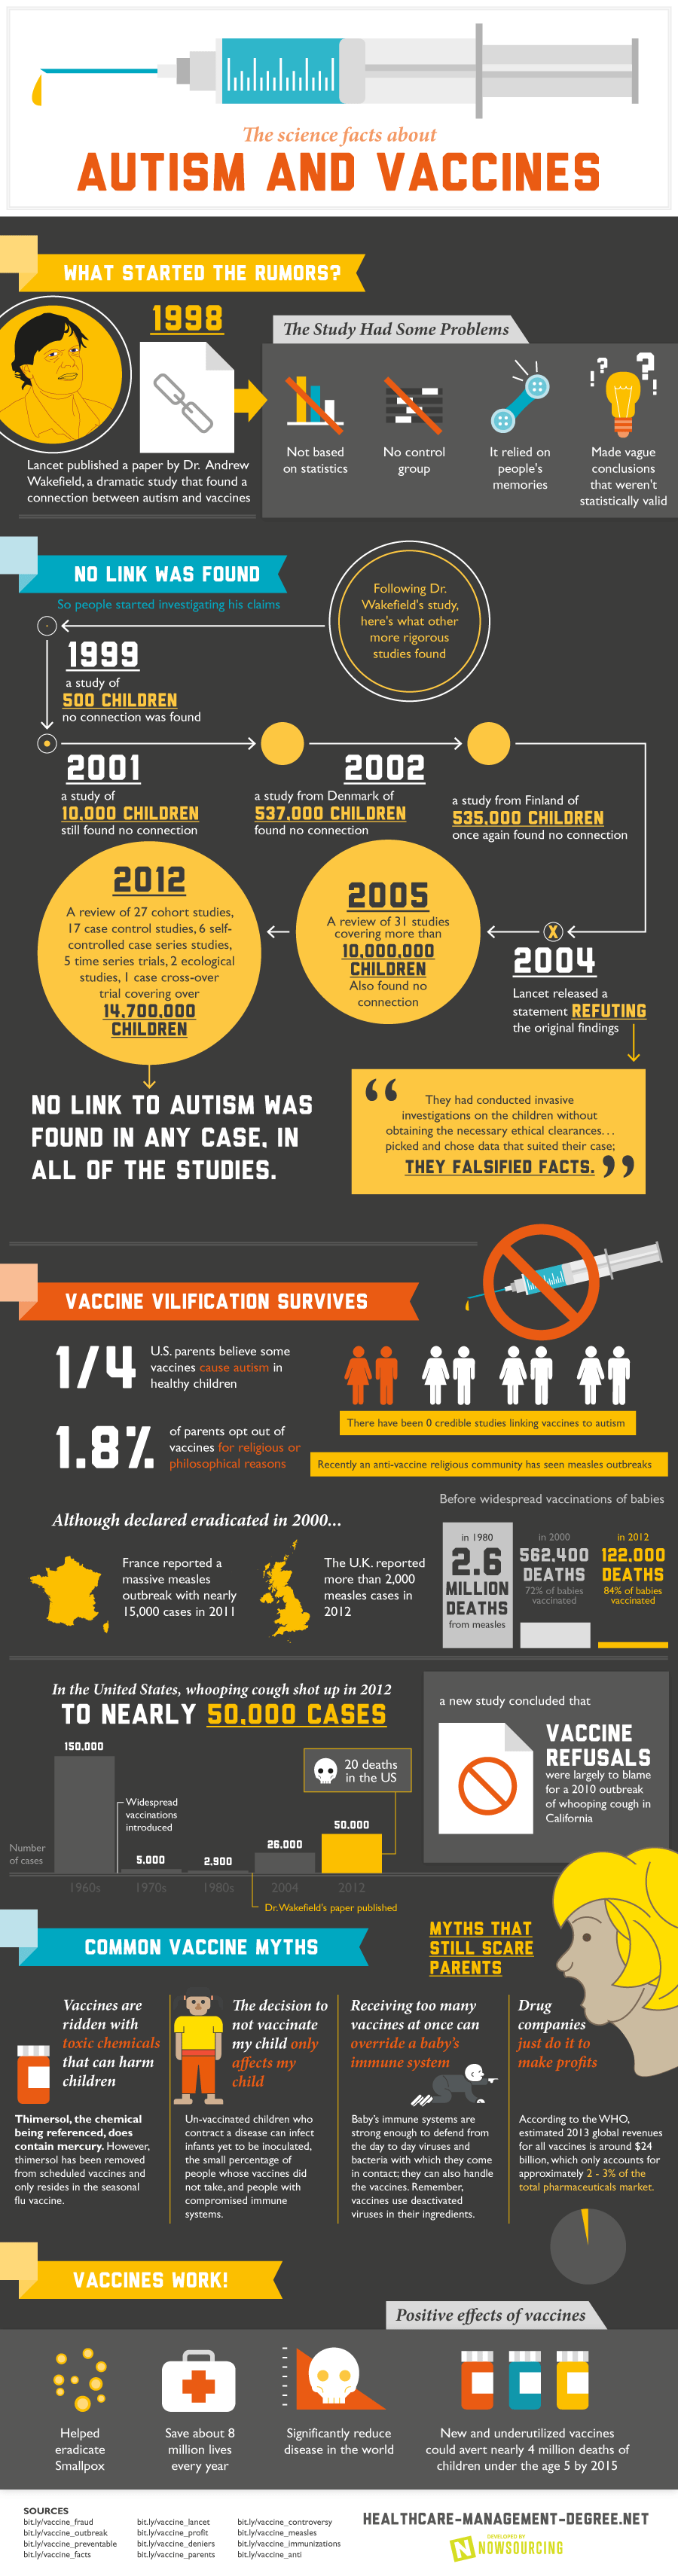 the science facts about autism and vaccines